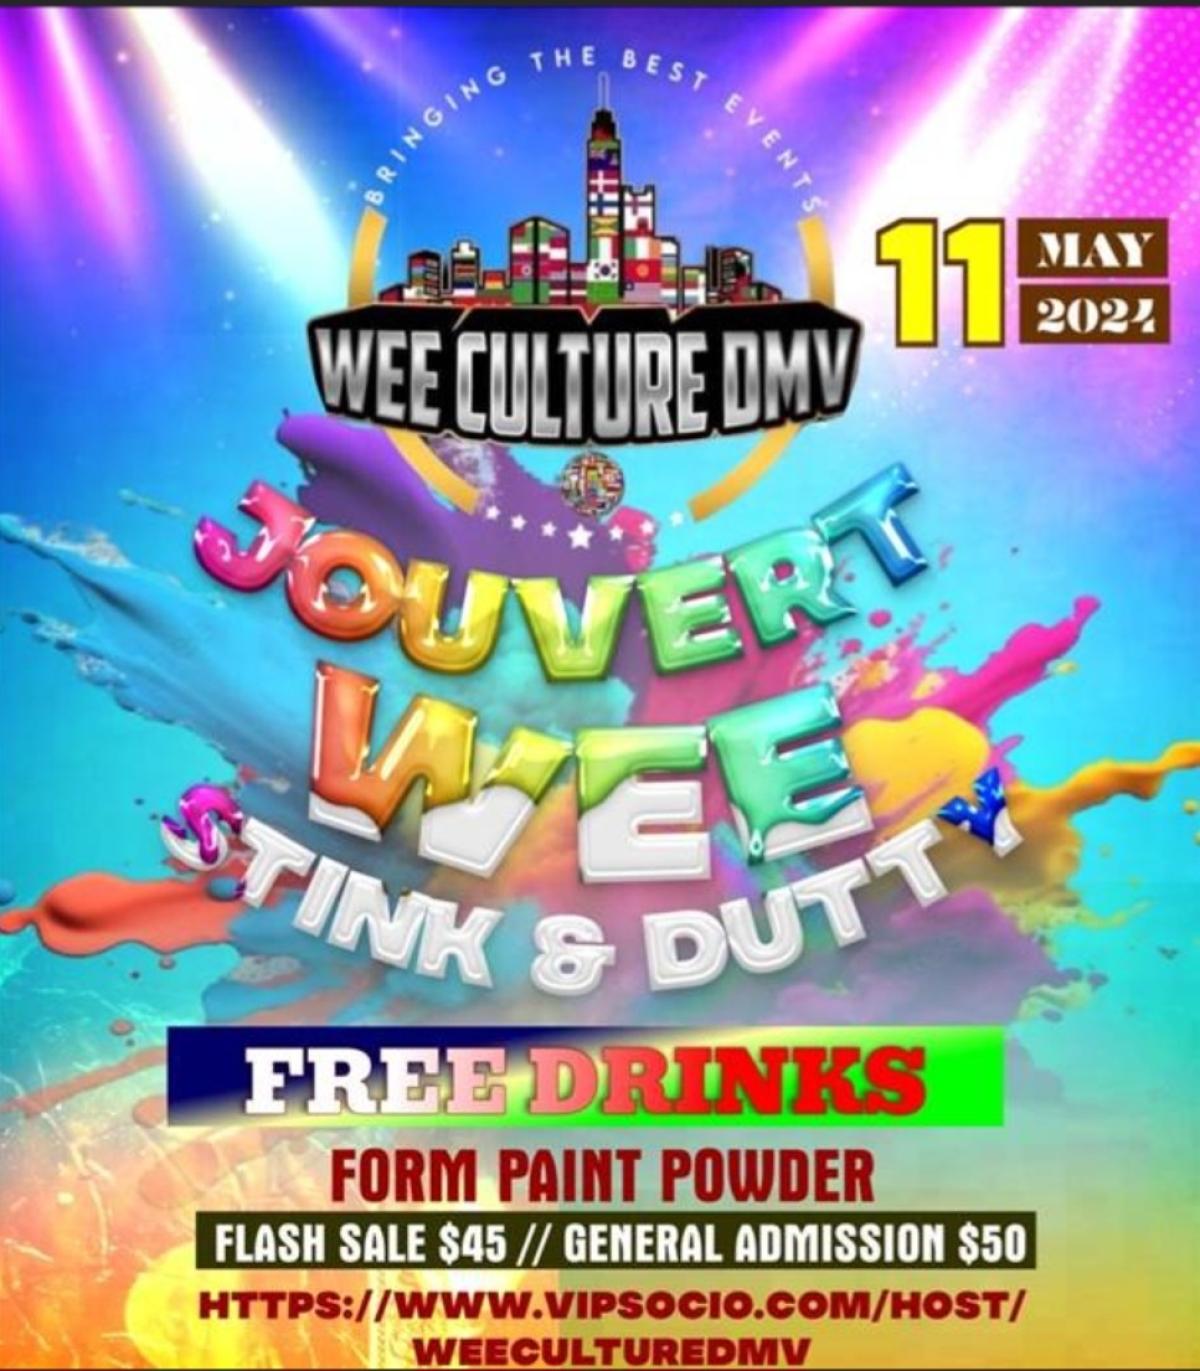 Wee Stink and Dutty Jouvert flyer or graphic.